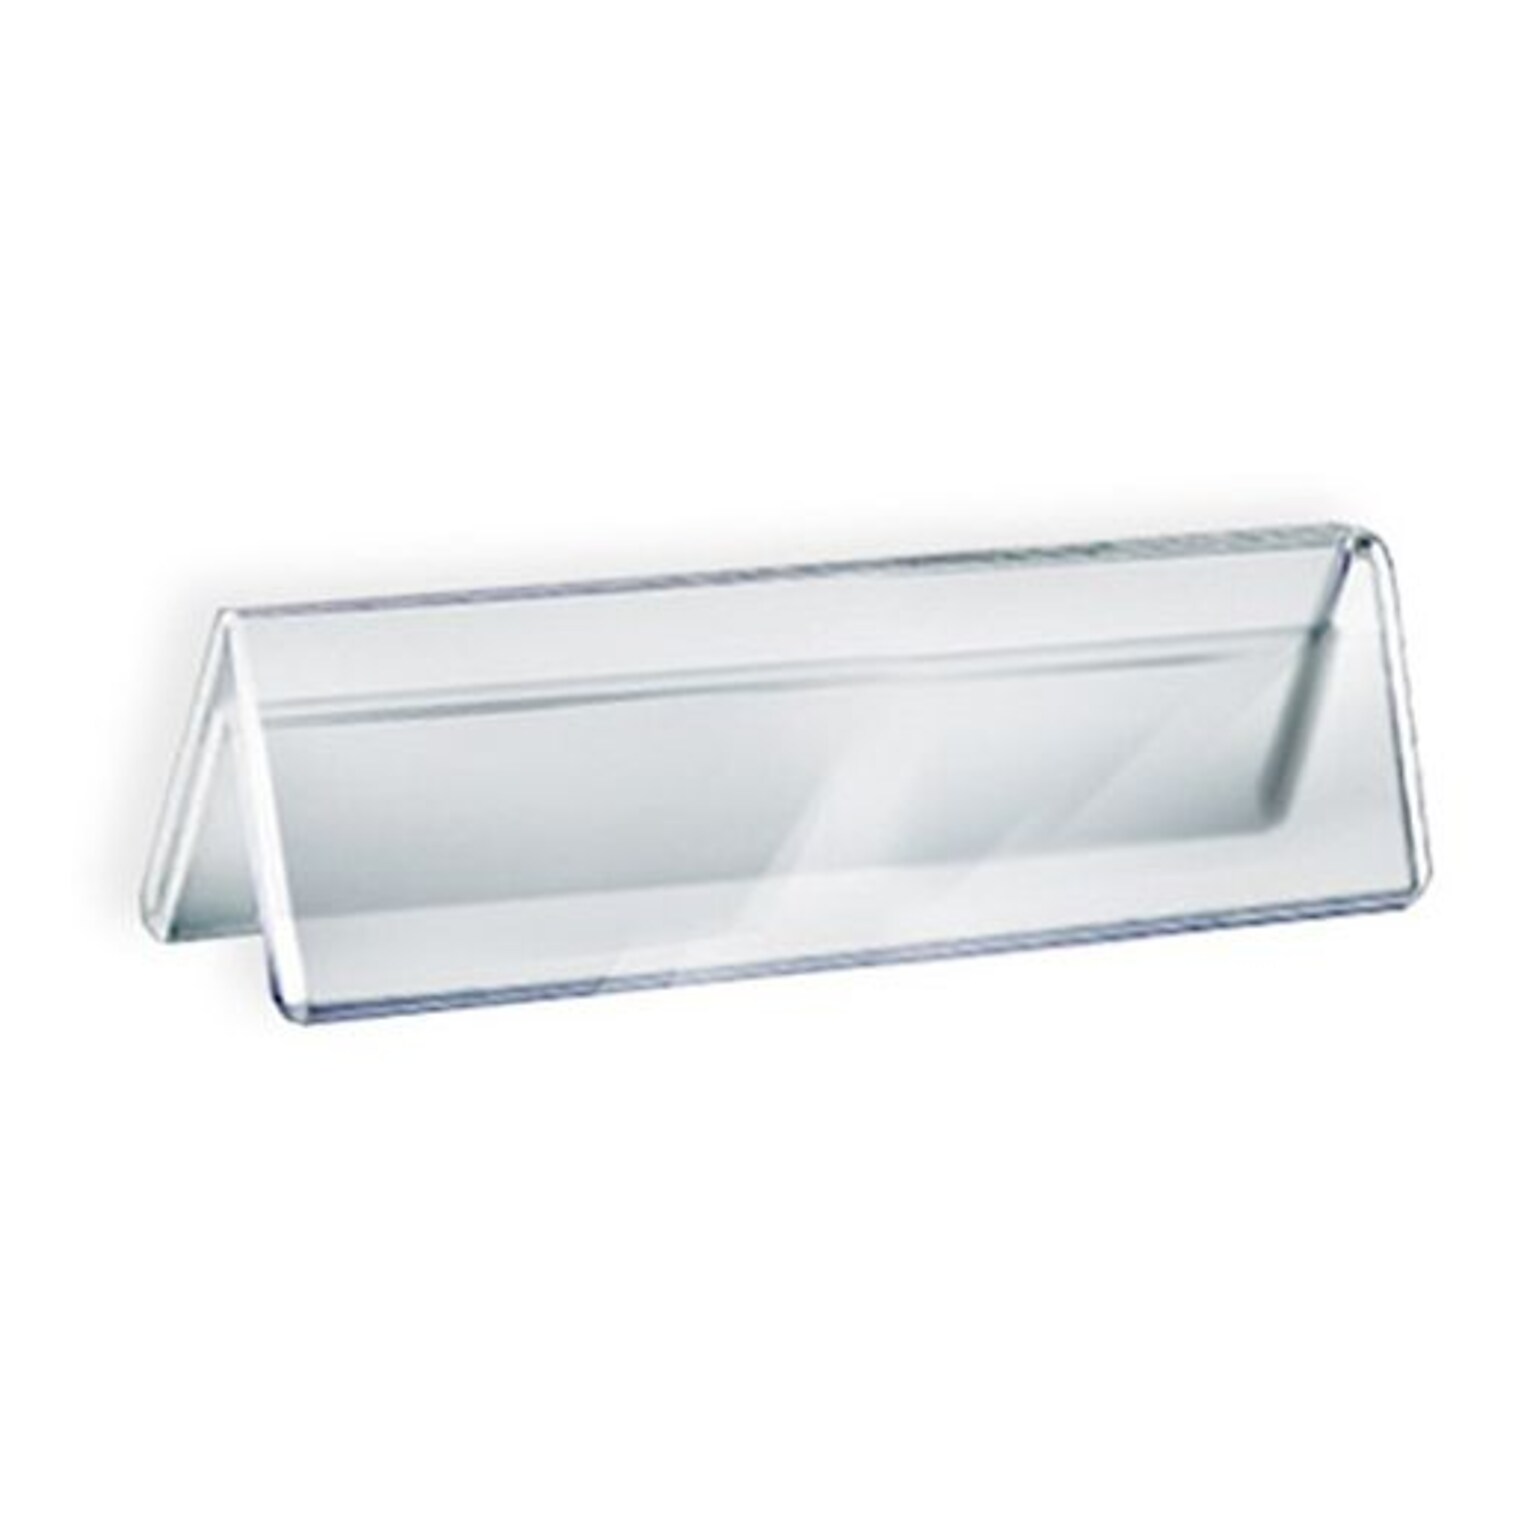 Azar Displays Two Sided Tent Style Clear Acrylic Sign Holder and Nameplate, Size: 6 W x 2 H on each side, 10-Pack (192801)